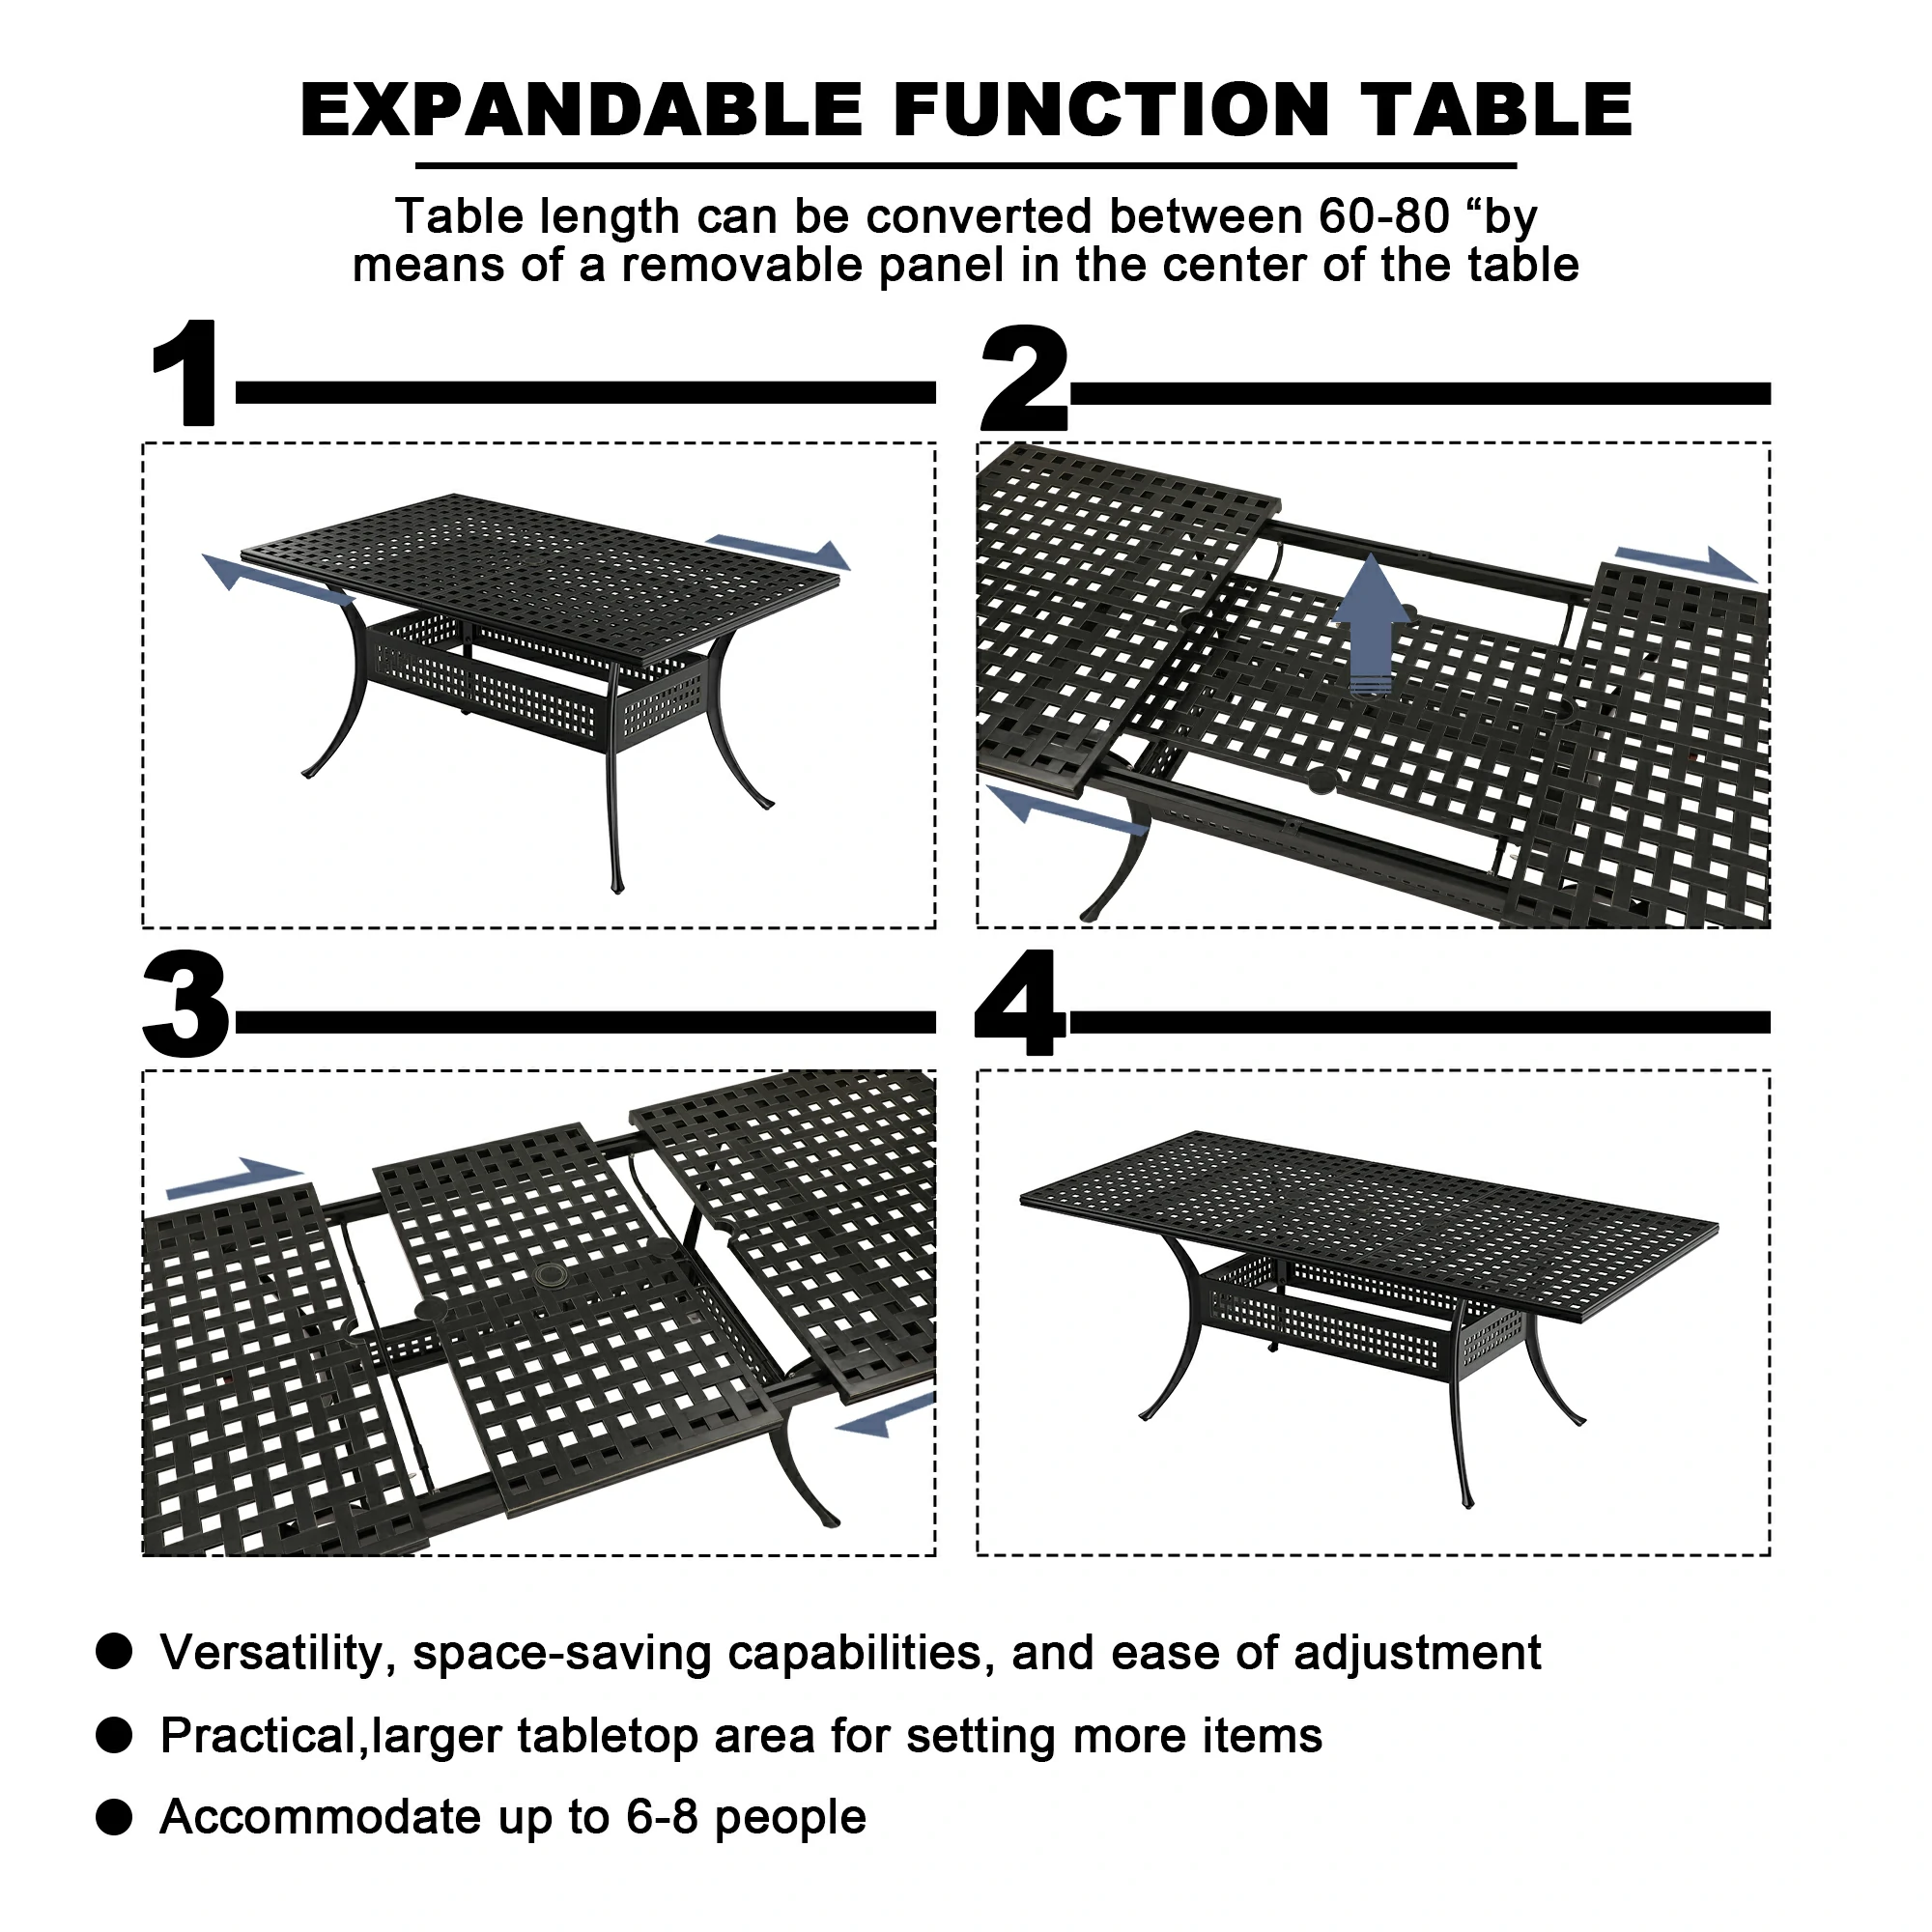 80in. L x 38in. W Outdoor Dining Table Sturdy Cast Aluminum Frame Rectangular Adjustable Length Vintage Patio Table with 2.1 Inch Umbrella Hole